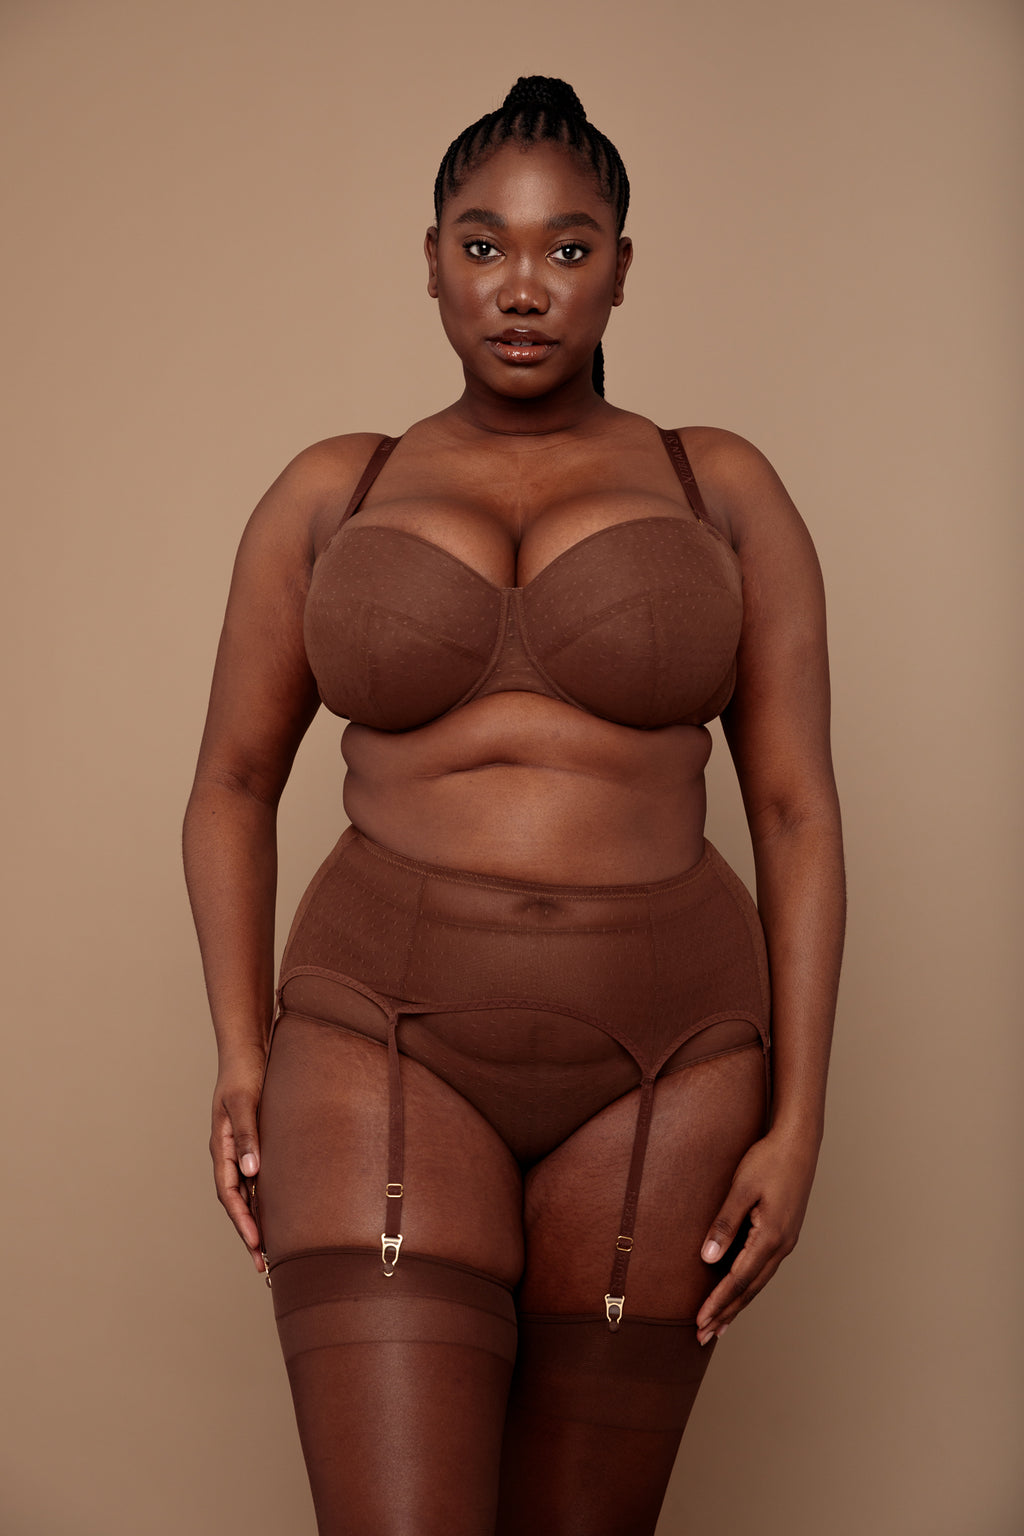 10 Black Owned Lingerie Brands That Will Add Spice To Your